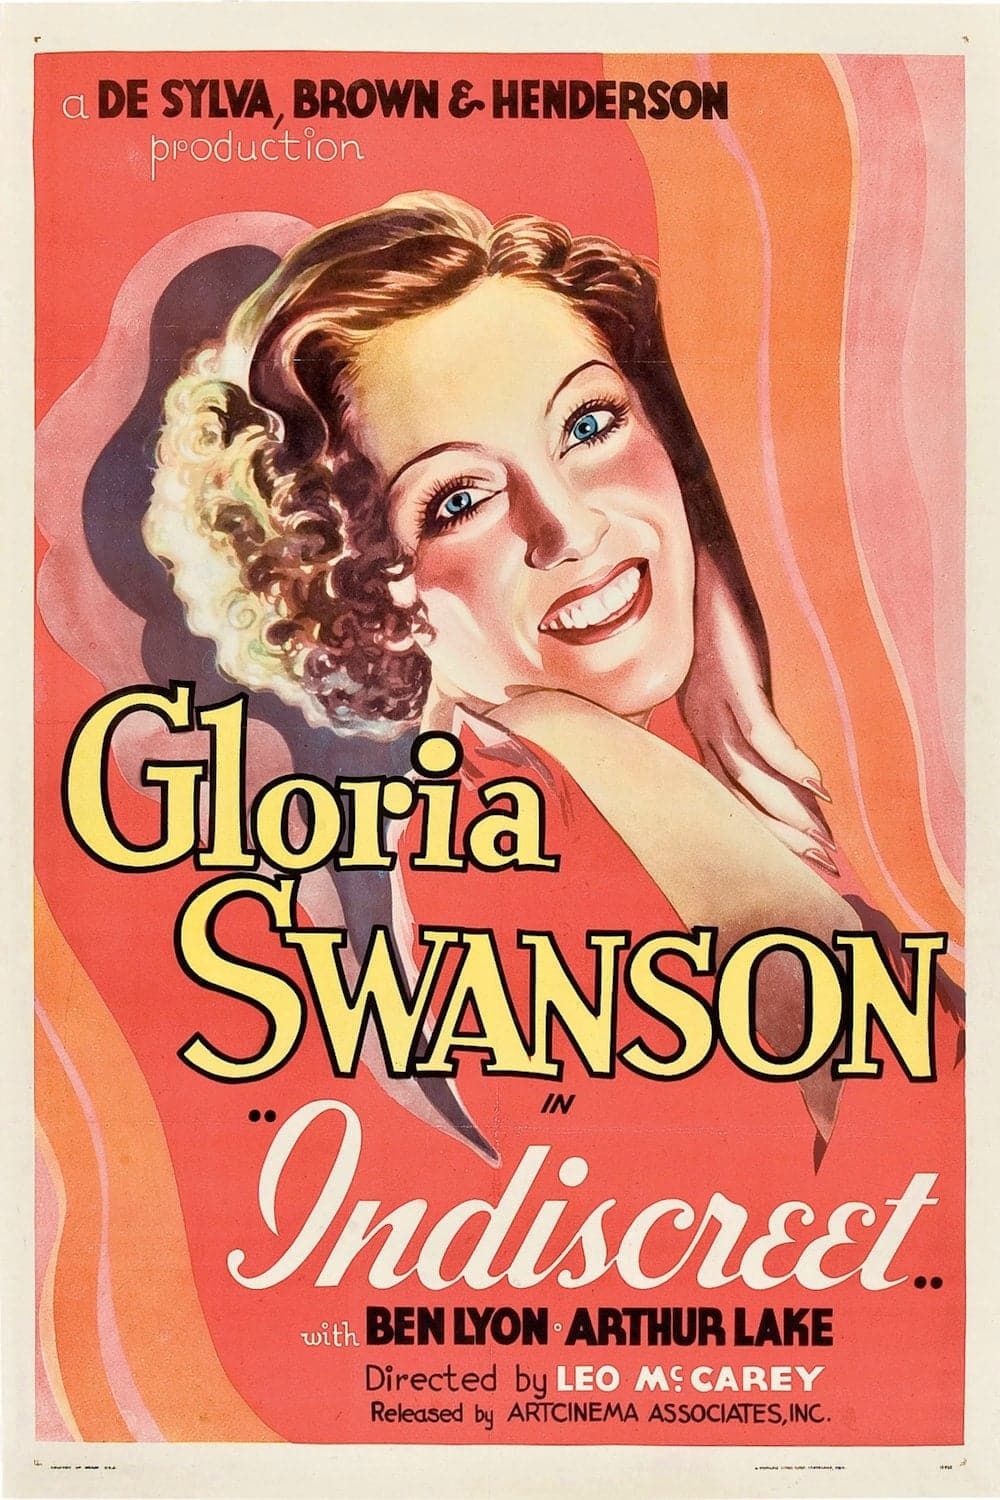 Poster for the movie "Indiscreet"